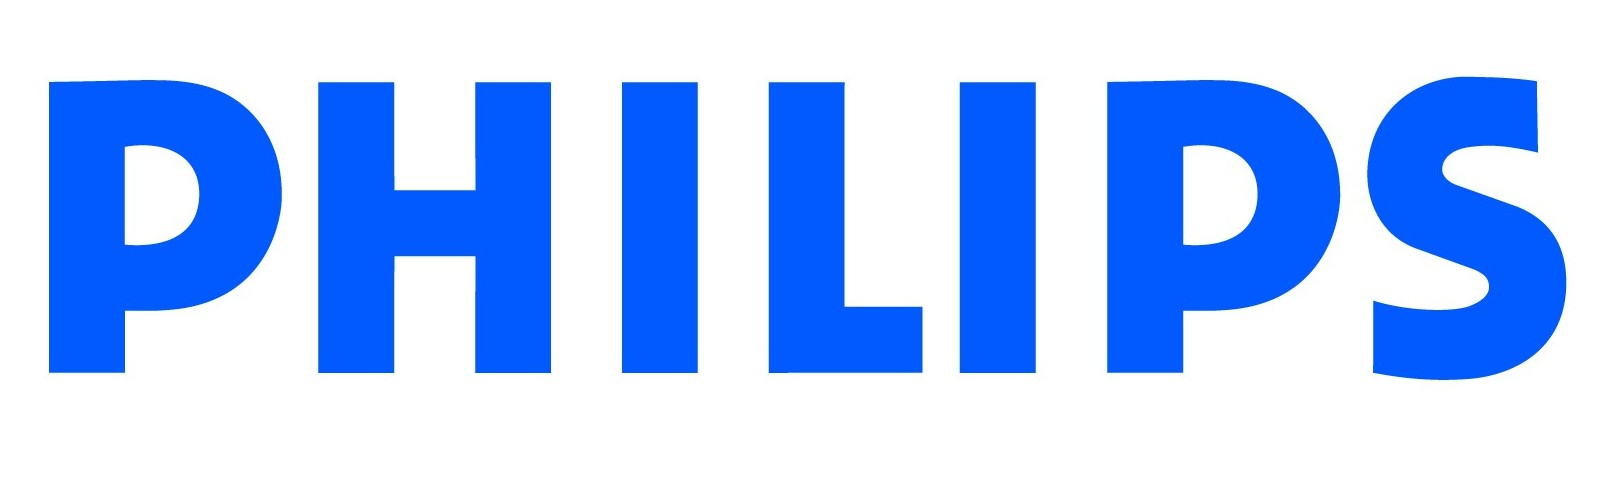 Philips Logo.png - Philips, Transparent background PNG HD thumbnail